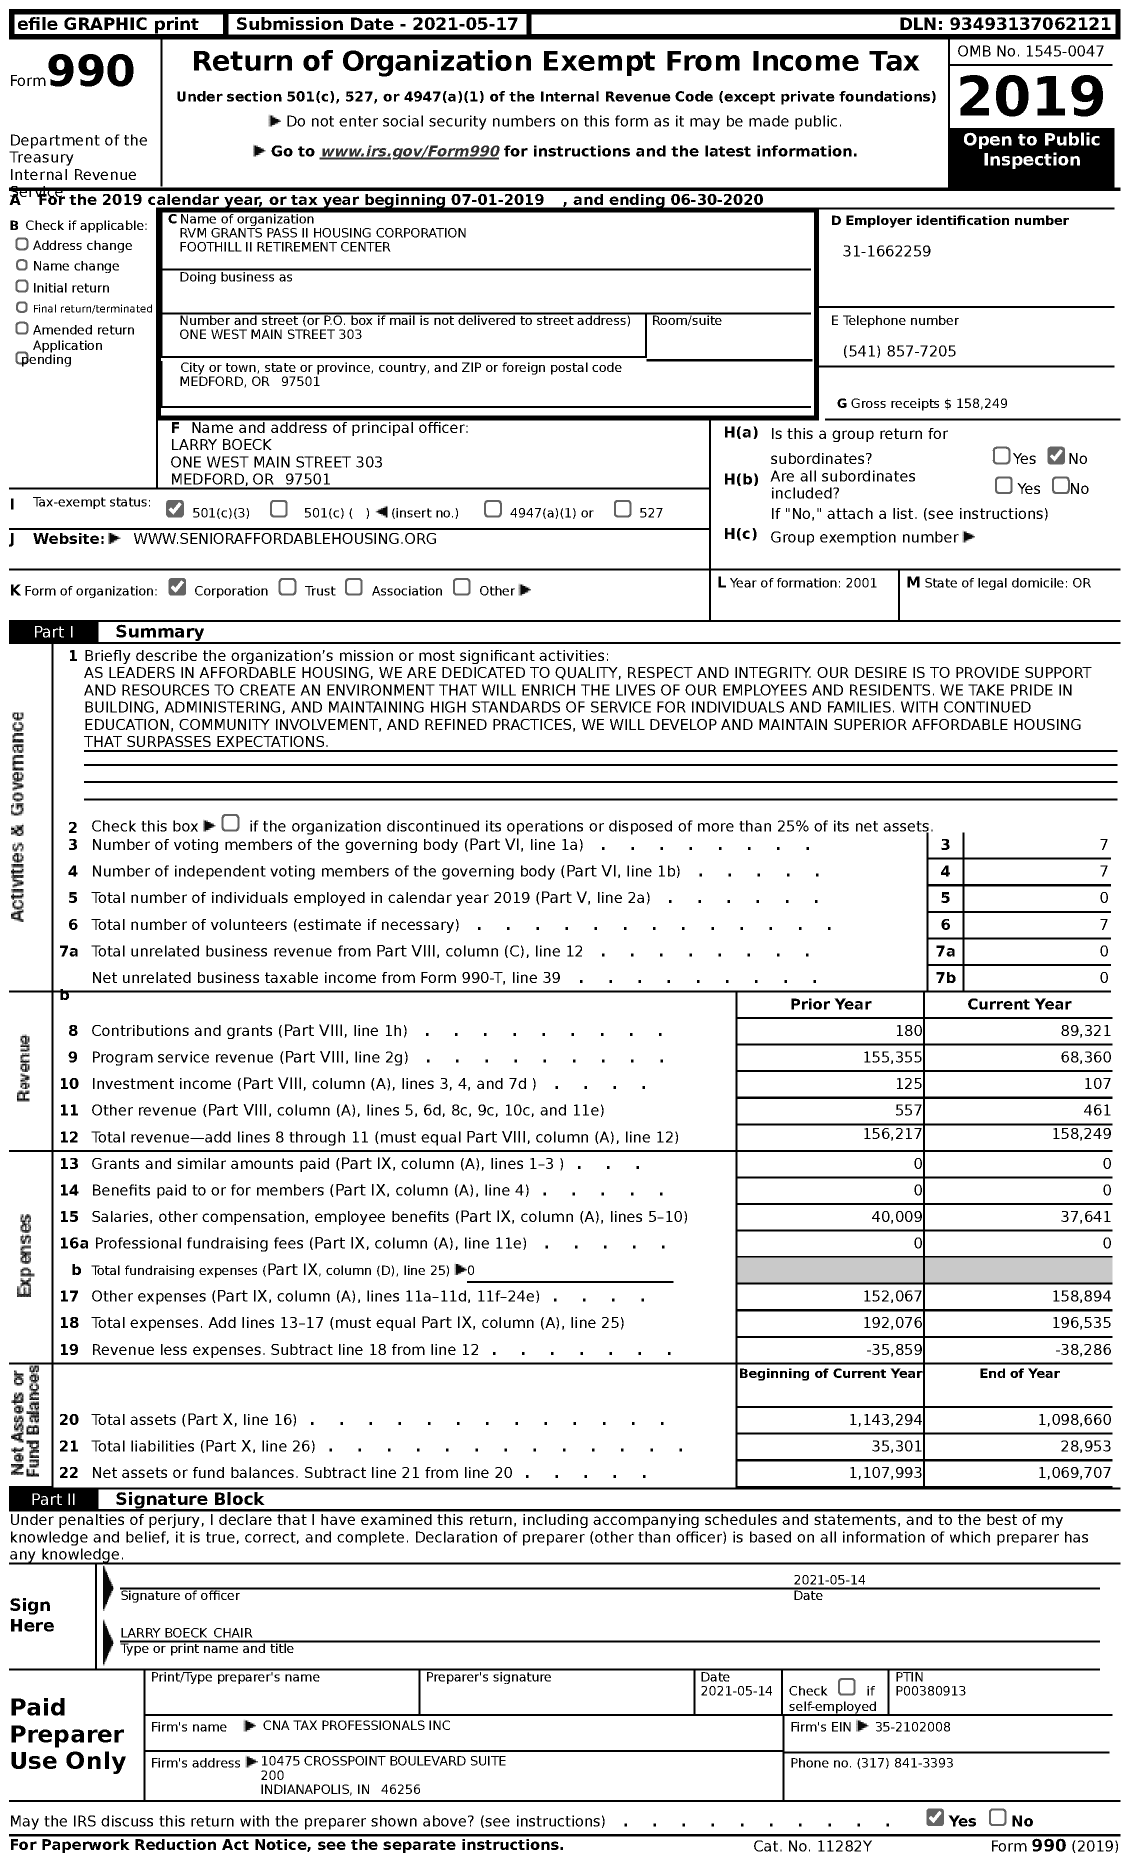 Image of first page of 2019 Form 990 for RVM Grants Pass II Housing Corporation Foothill II Retirement Center